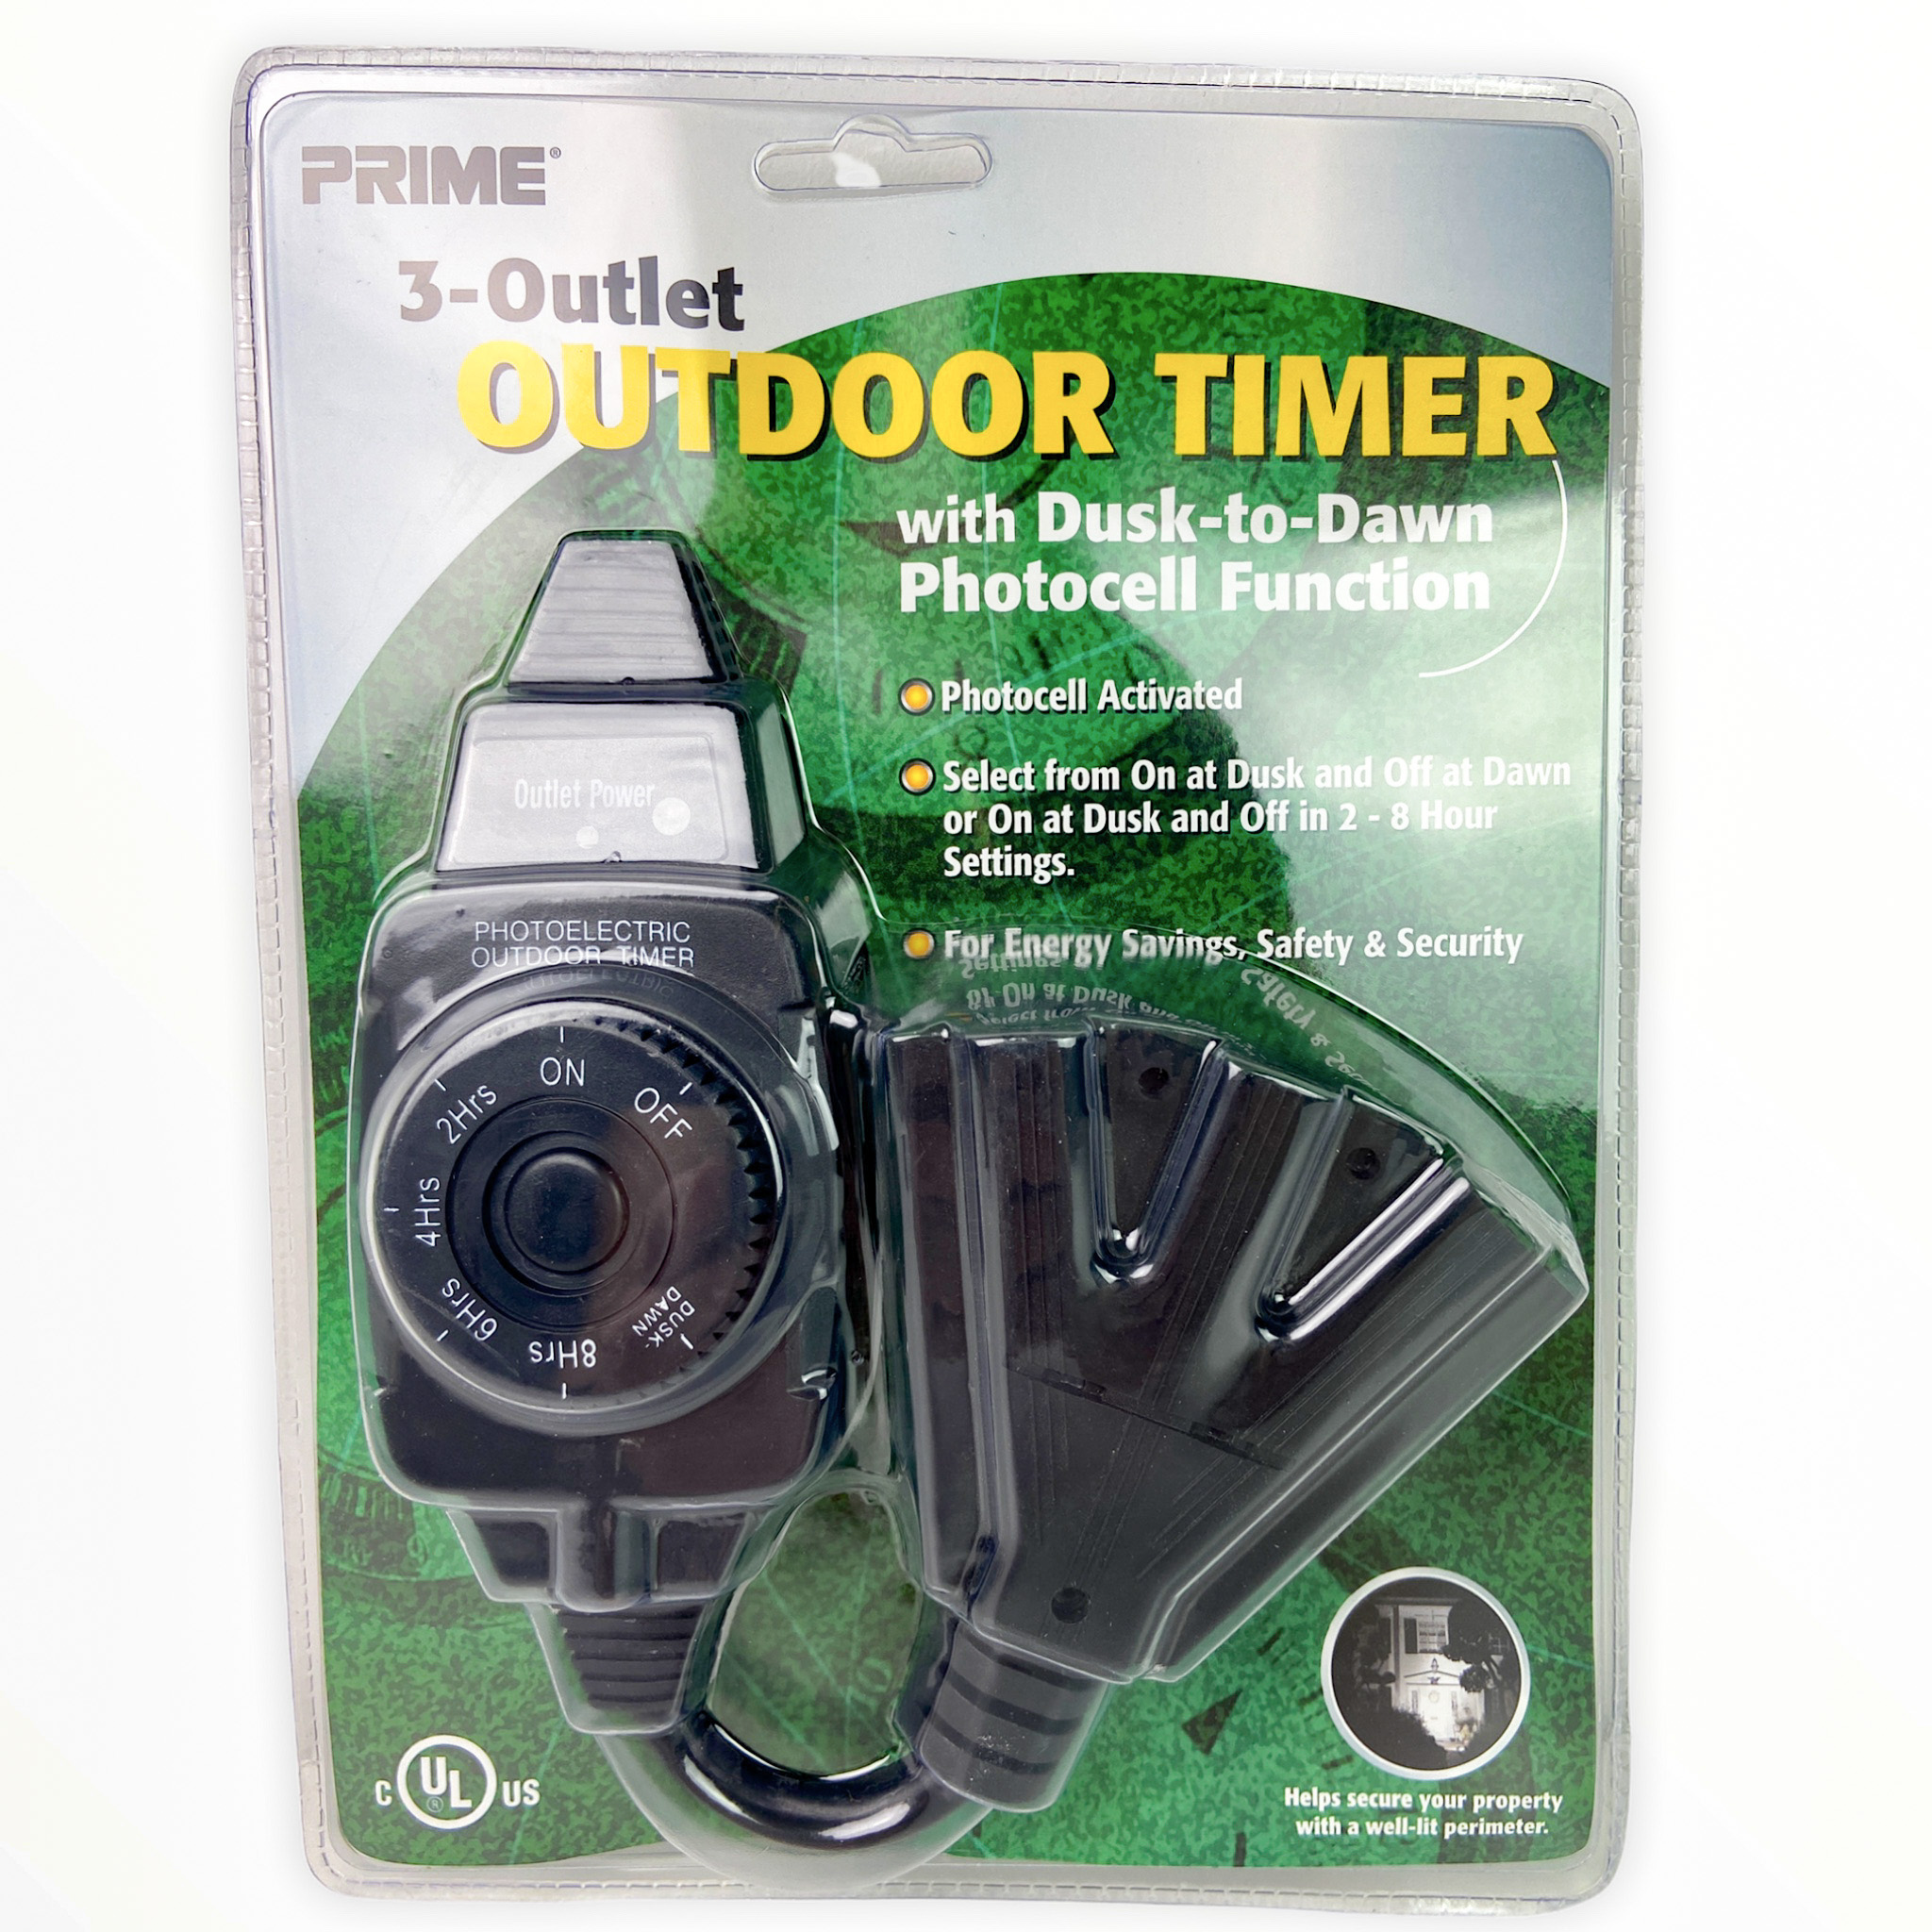 3 Outlet Outdoor Timer $13.99.